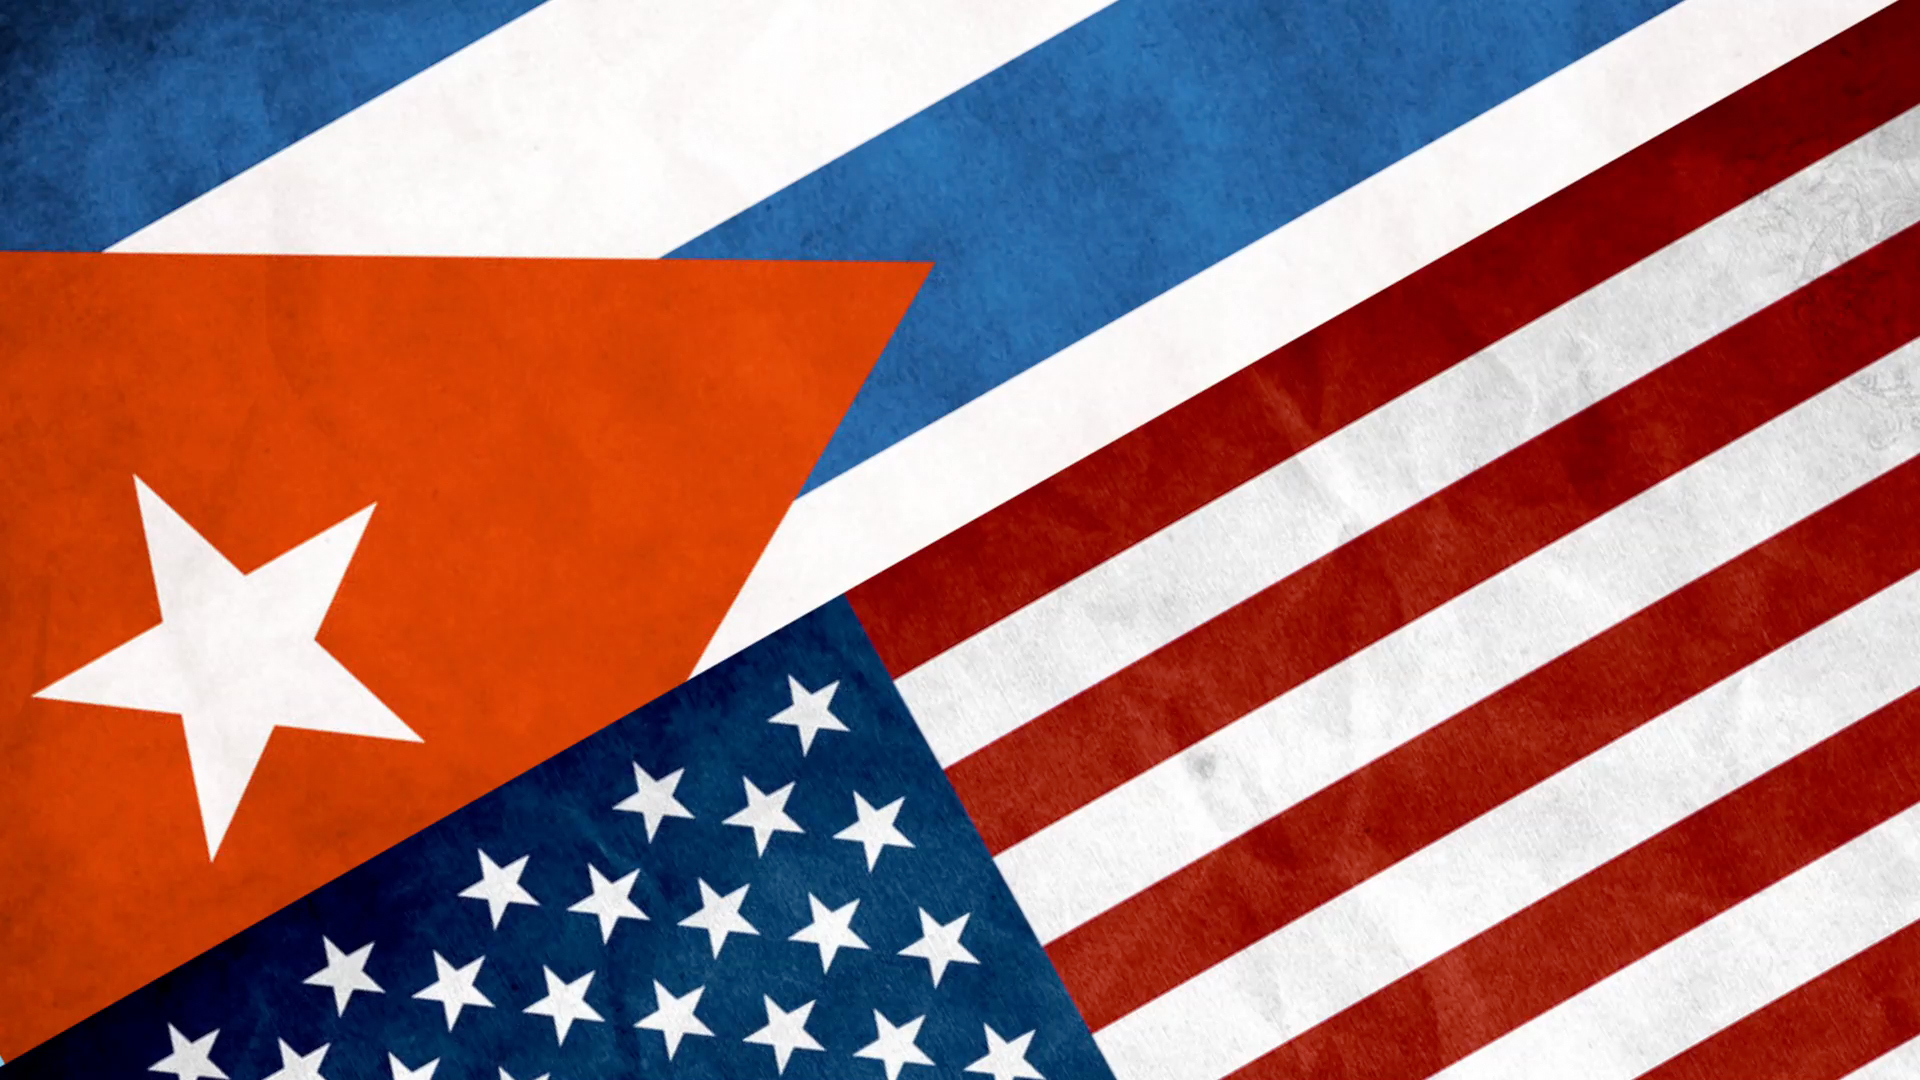 Timeline: Key events in US-Cuba relations